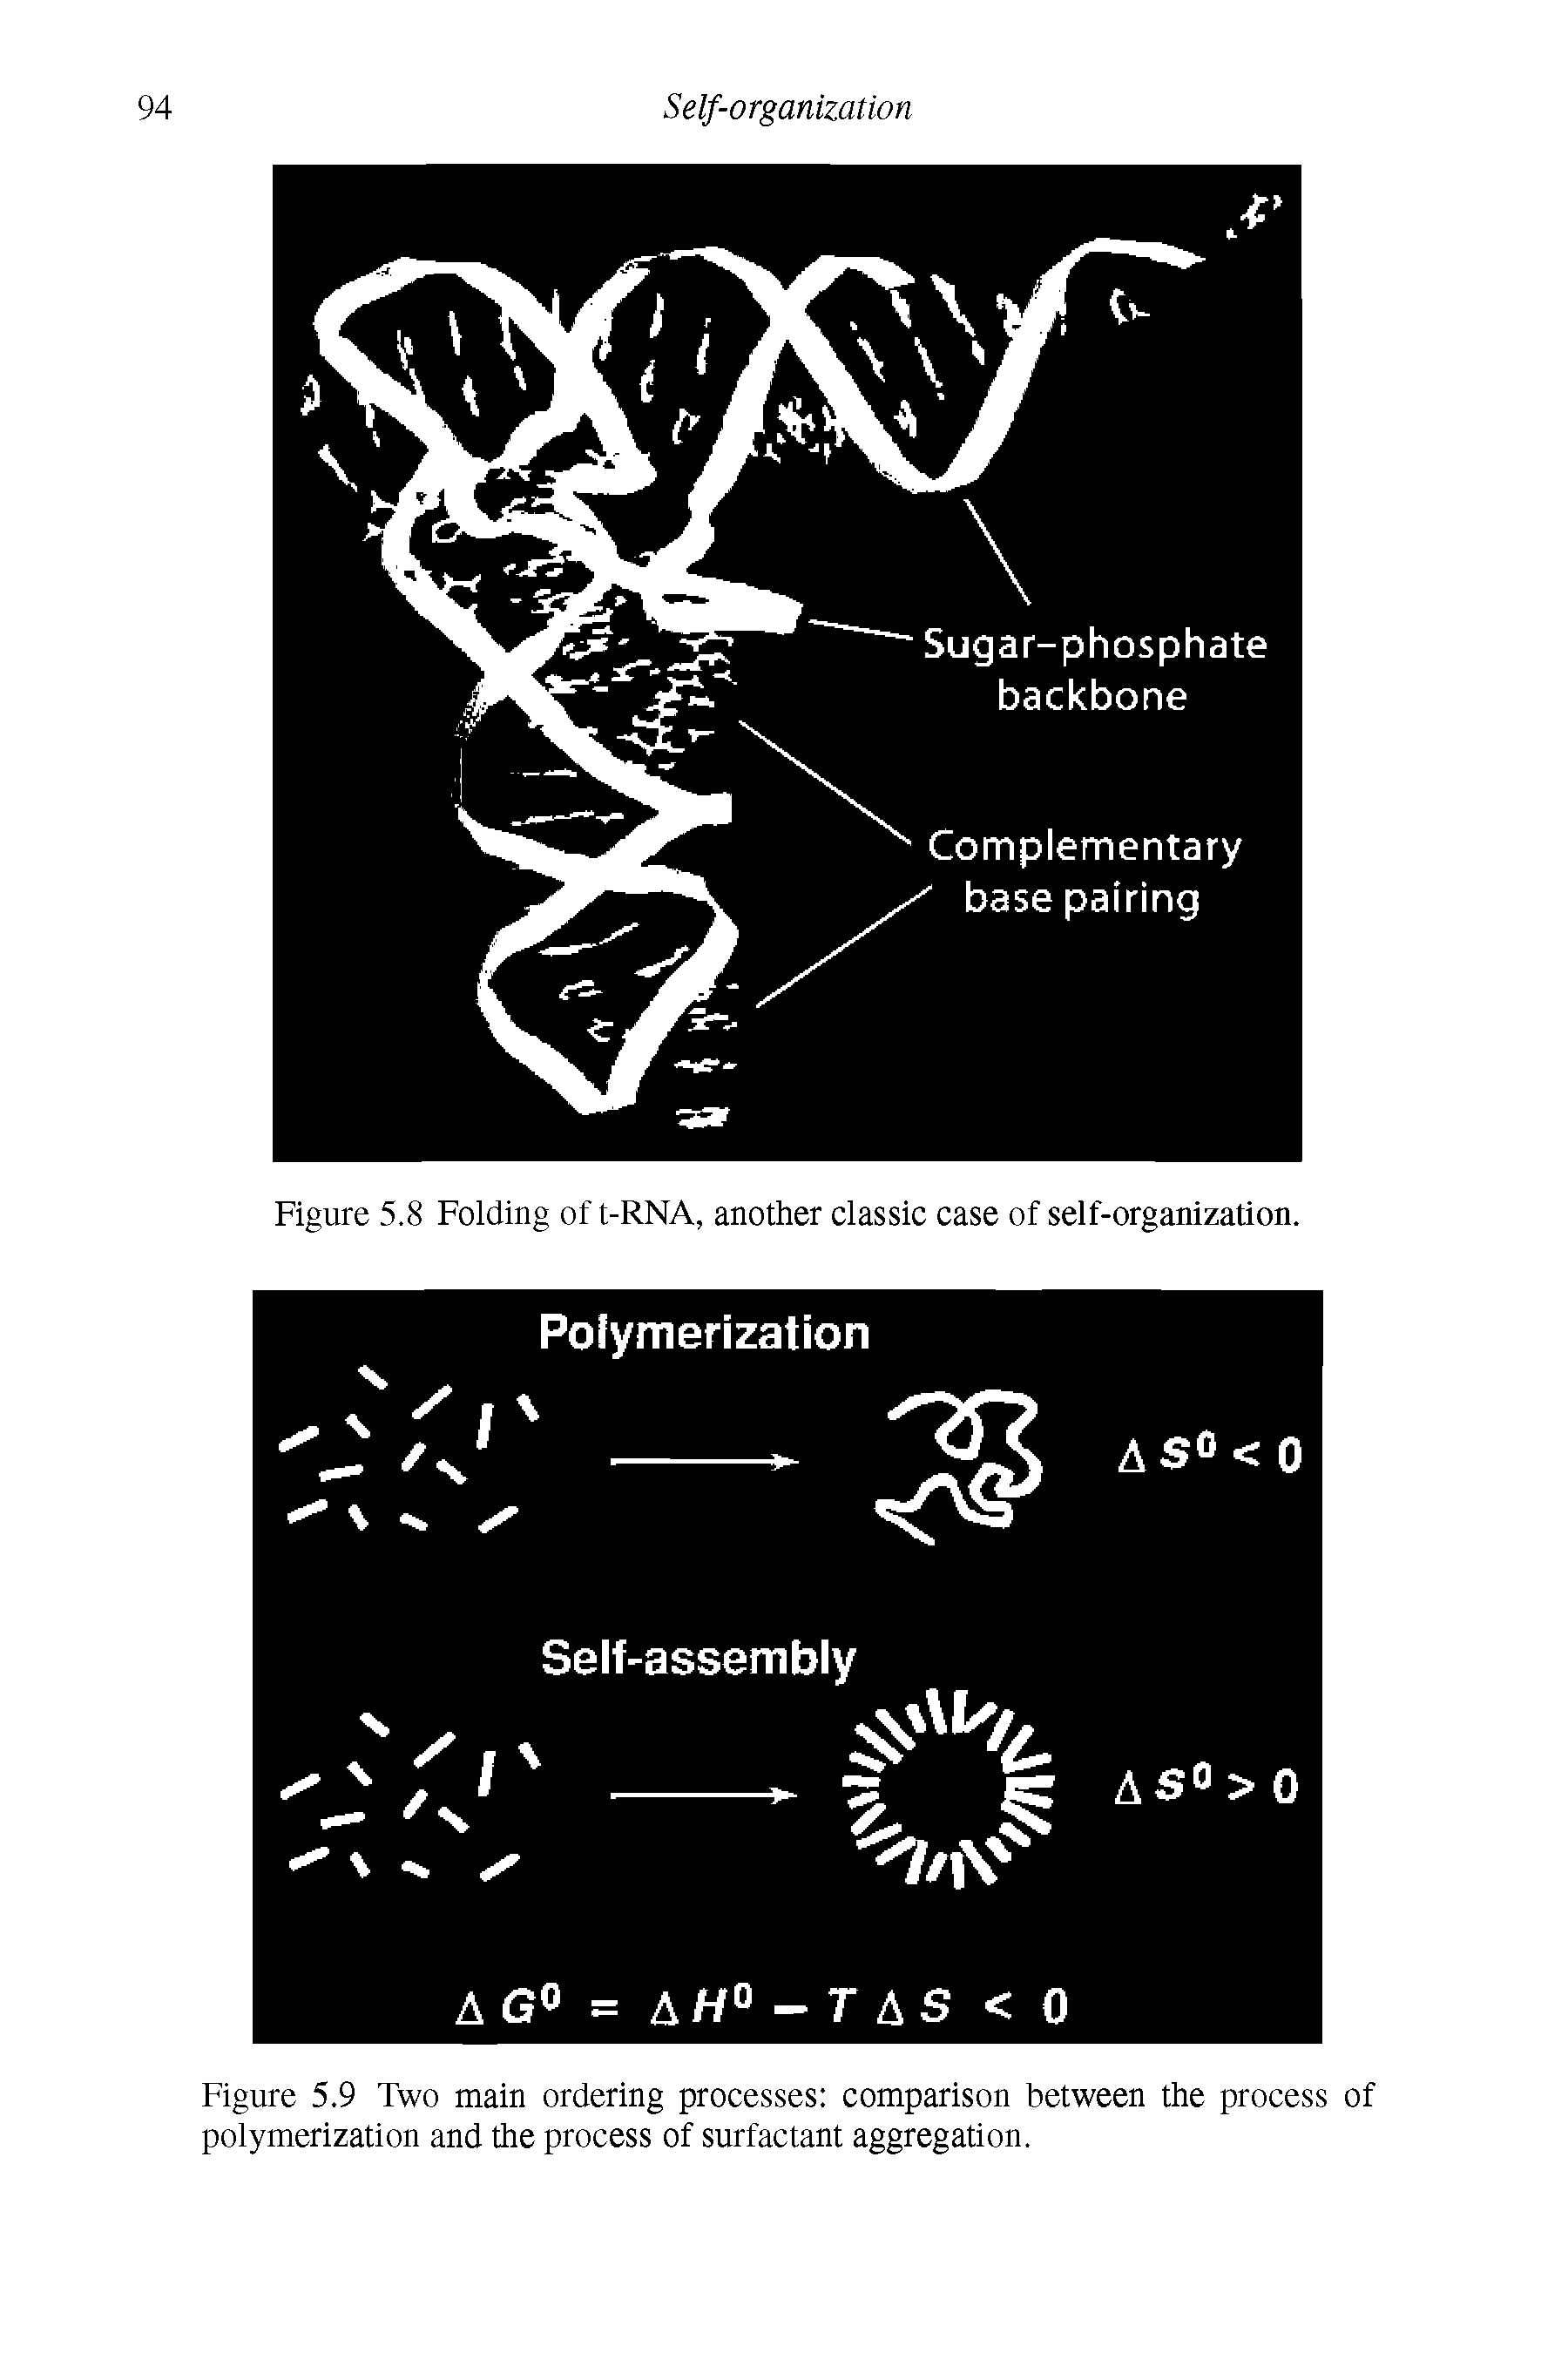 Figure 5.9 Two main ordering processes comparison between the process of polymerization and the process of surfactant aggregation.